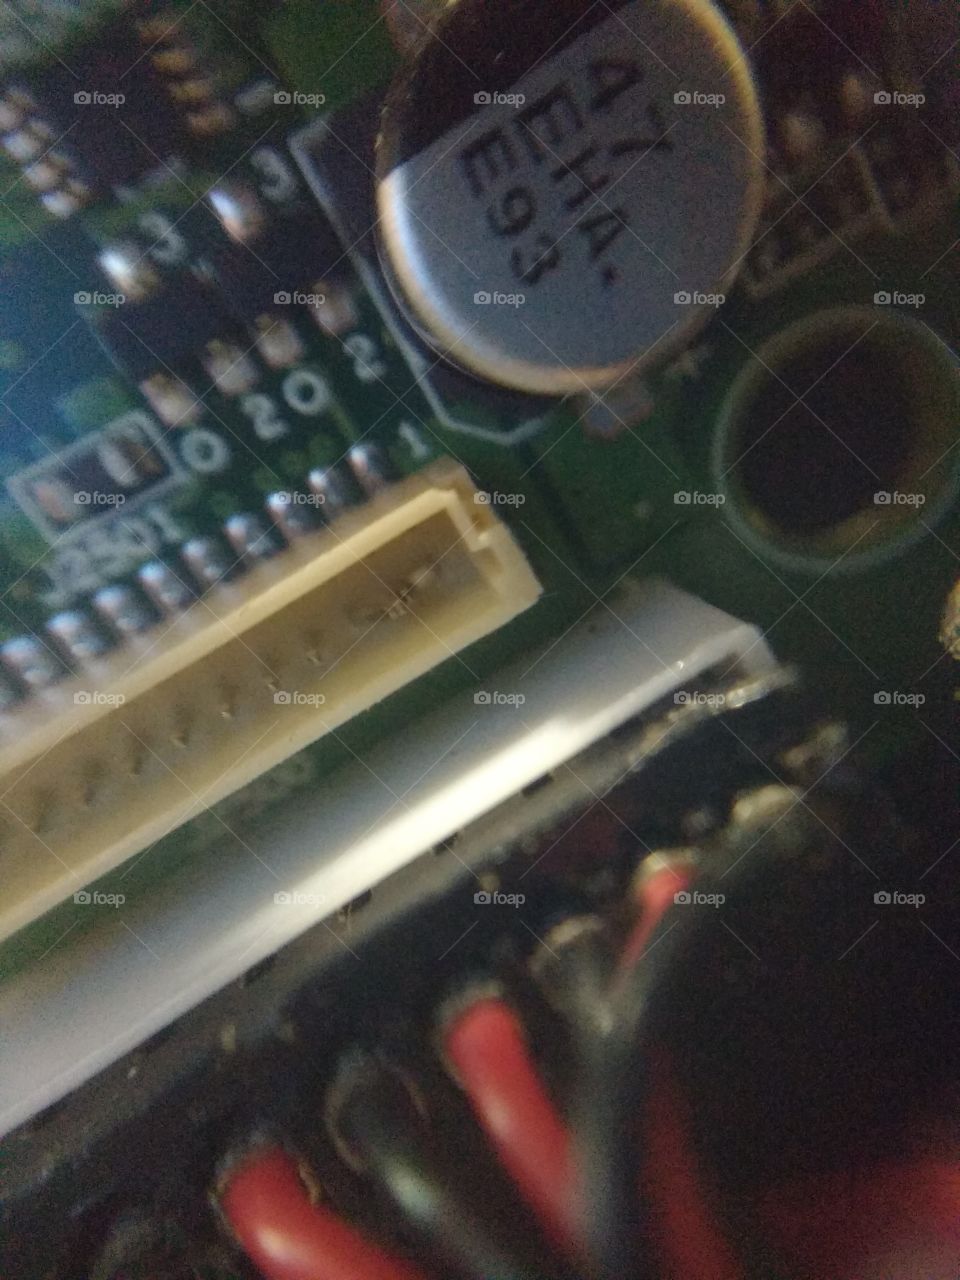 bent contact pins inside a data port on a circuit board